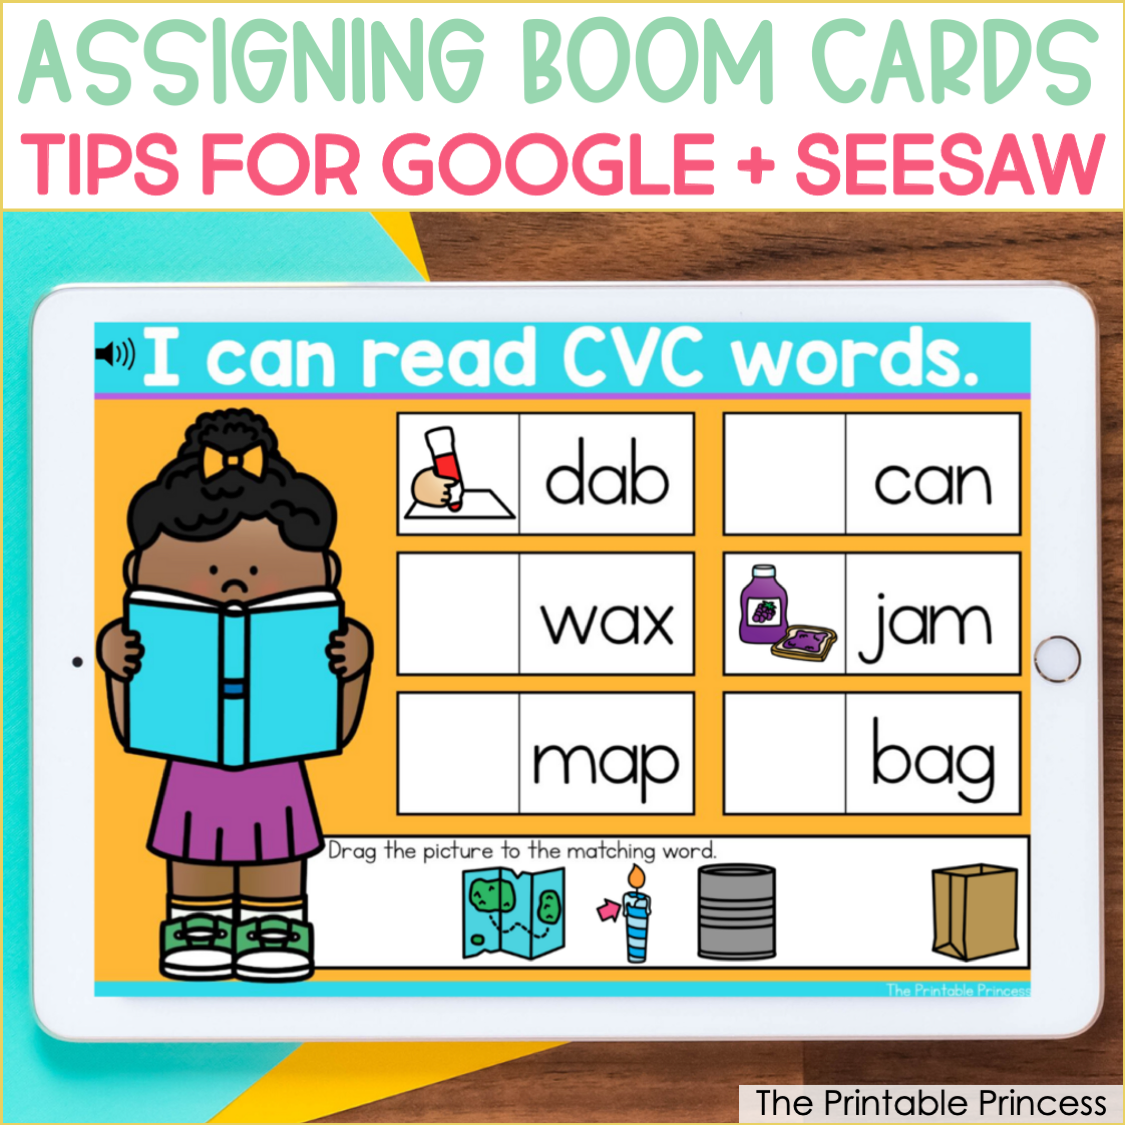 How to Assign Boom Cards using Google Classroom and Seesaw